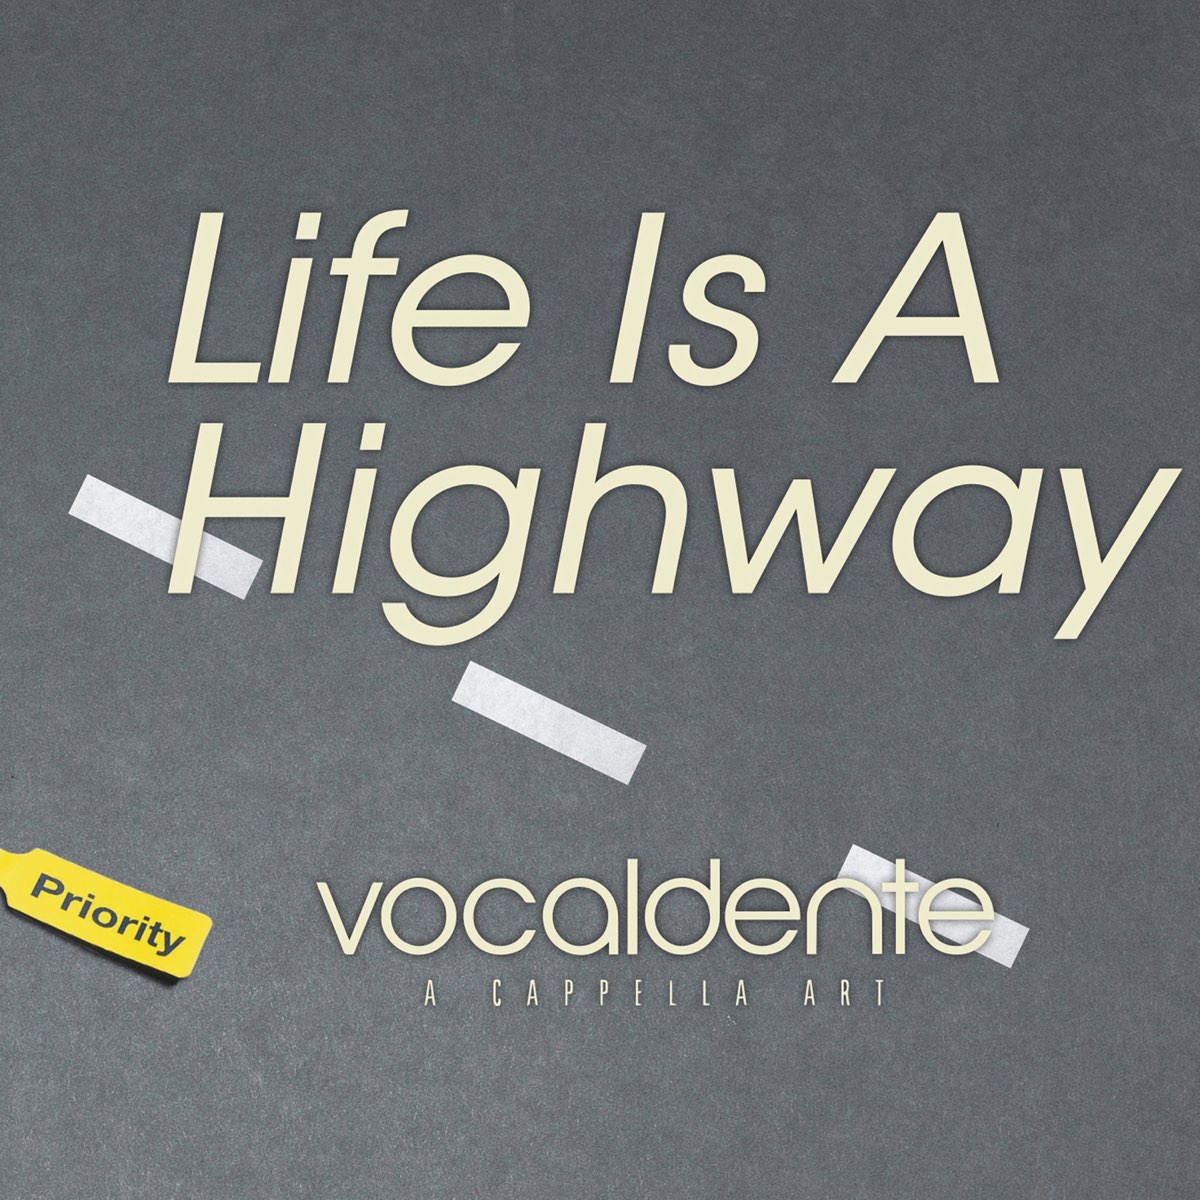 Yesterday my life was. Life is a Highway. Life is a Highway перевод. Life is a Highway Chords. Album Art Timeless Life is a Highway.